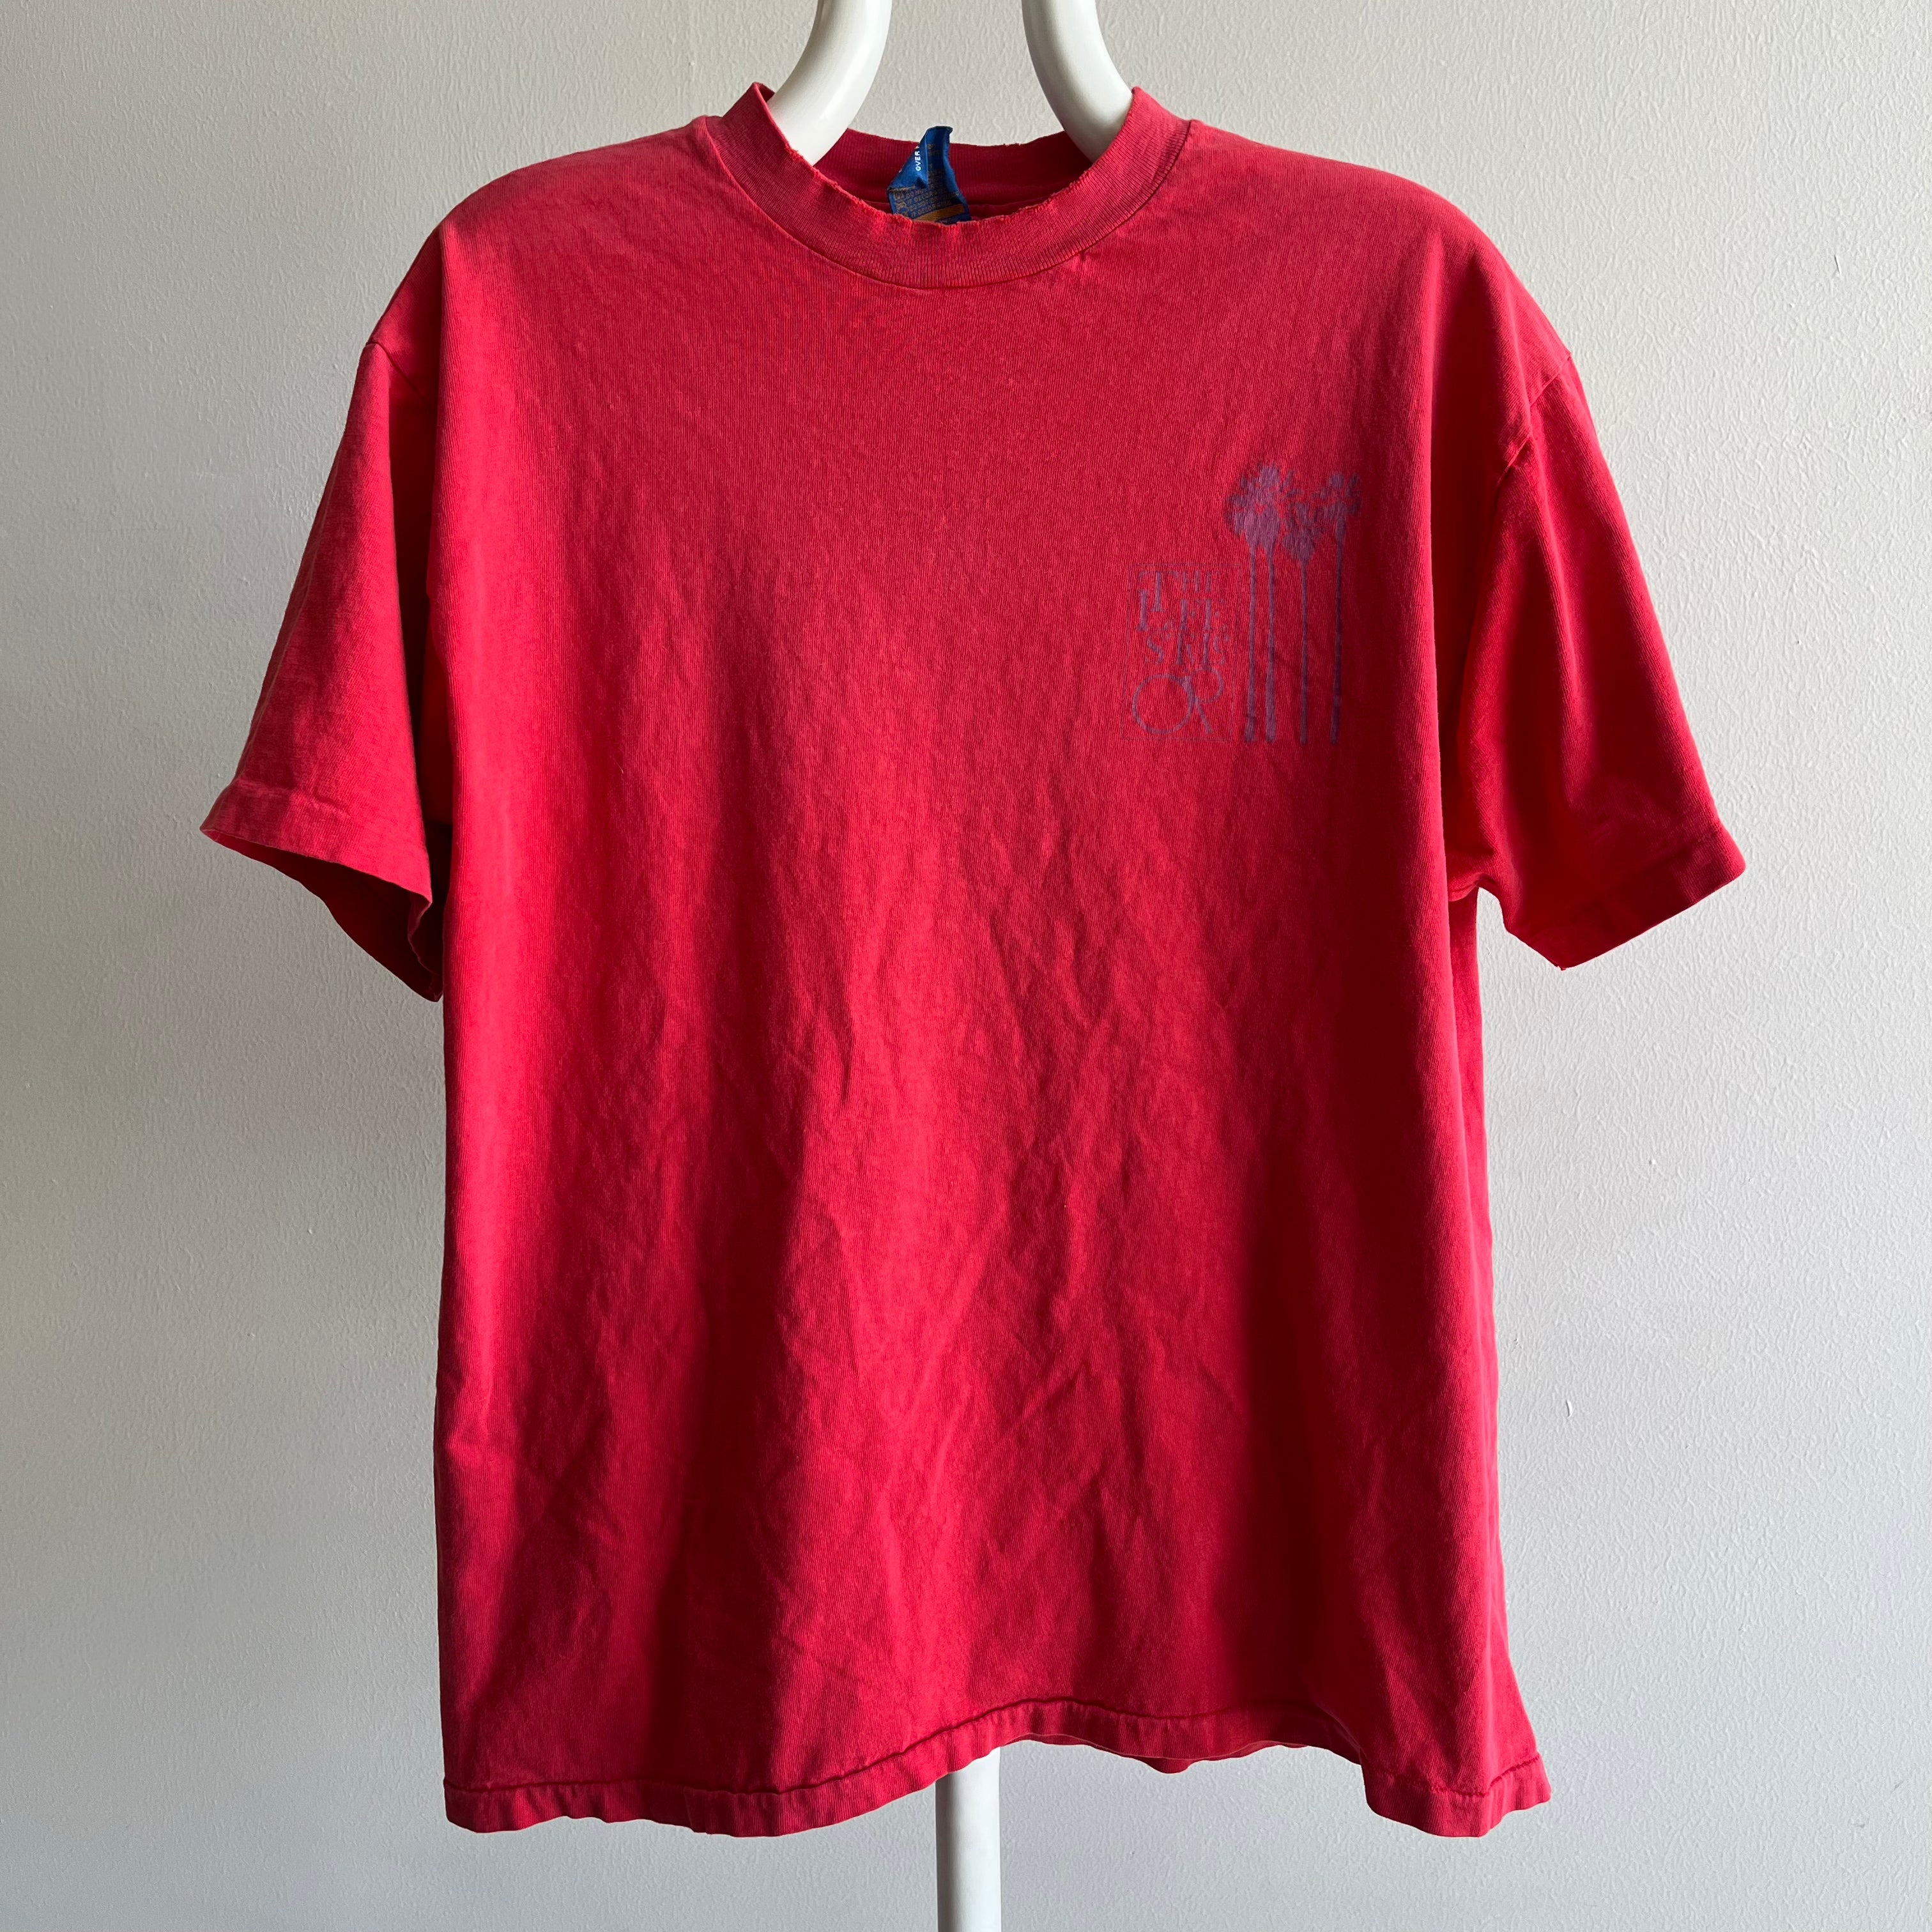 1986 Ocean Pacific Rad Backside Tattered and Worn Surfing T-Shirt – Red  Vintage Co